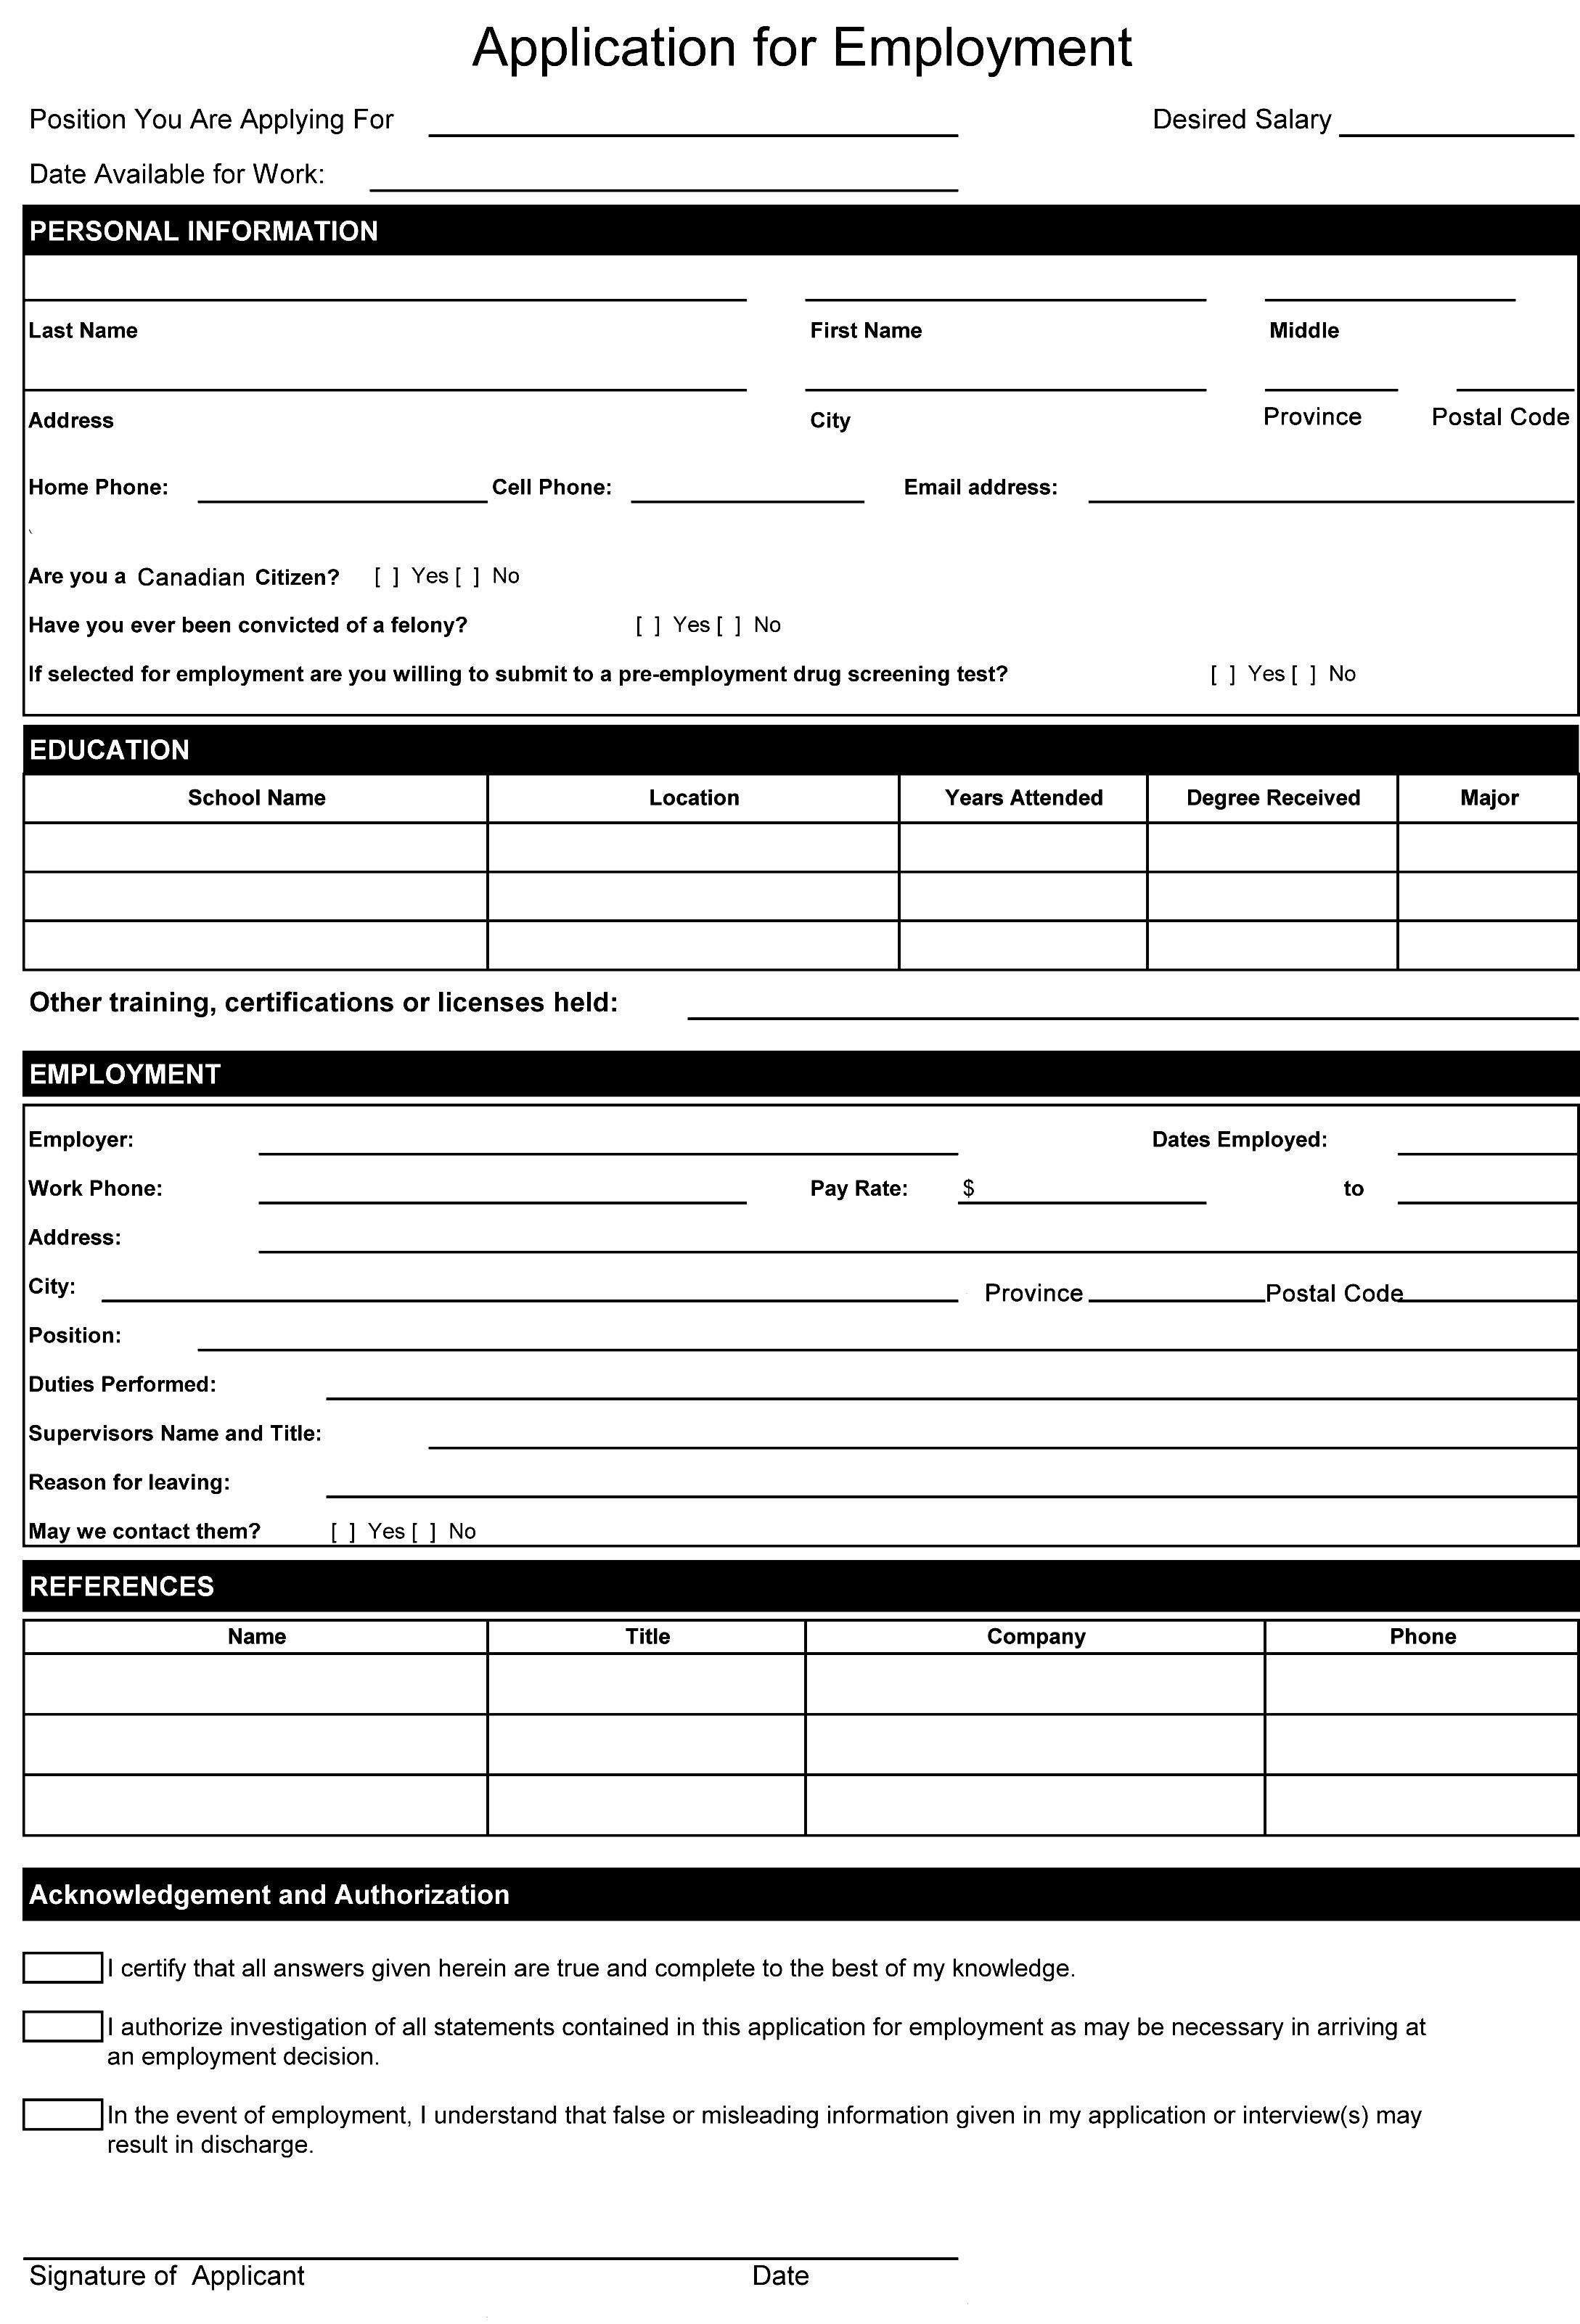 Resume Format Word Document | Resume Format | Job Application - Free Printable Employment Application